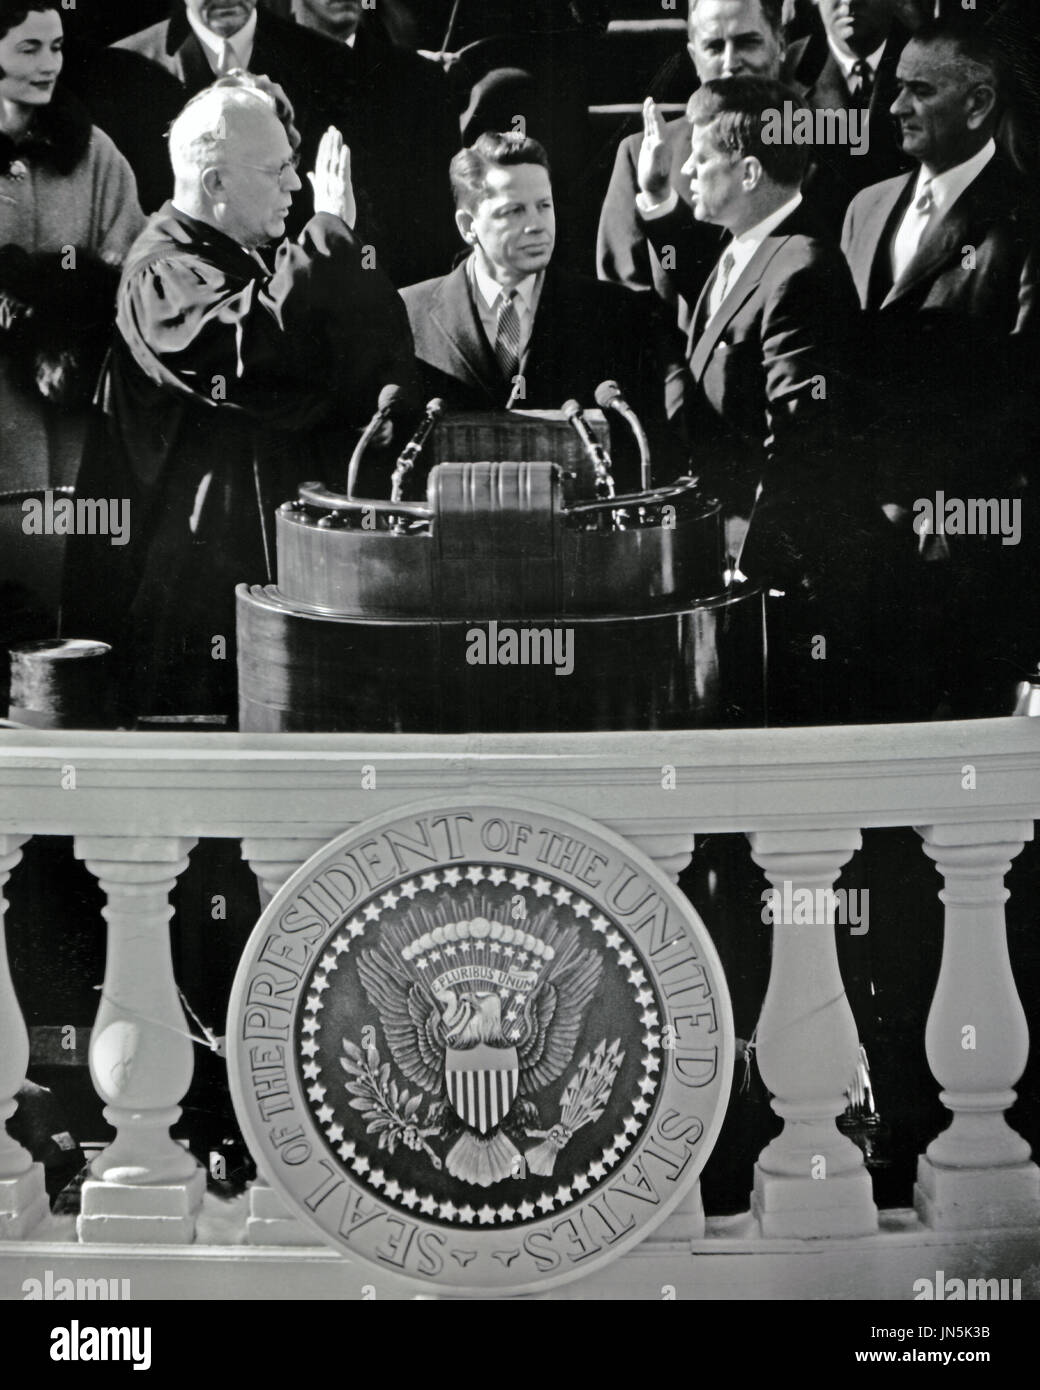 United States President John F. Kennedy is sworn-in as the 35th President of the United States by Chief Justice of the United States Earl Warren, left, on the East Front of the U.S. Capitol in Washington, D.C. on Friday, January 20, 1961..Credit: Arnie Sachs / CNP Stock Photo